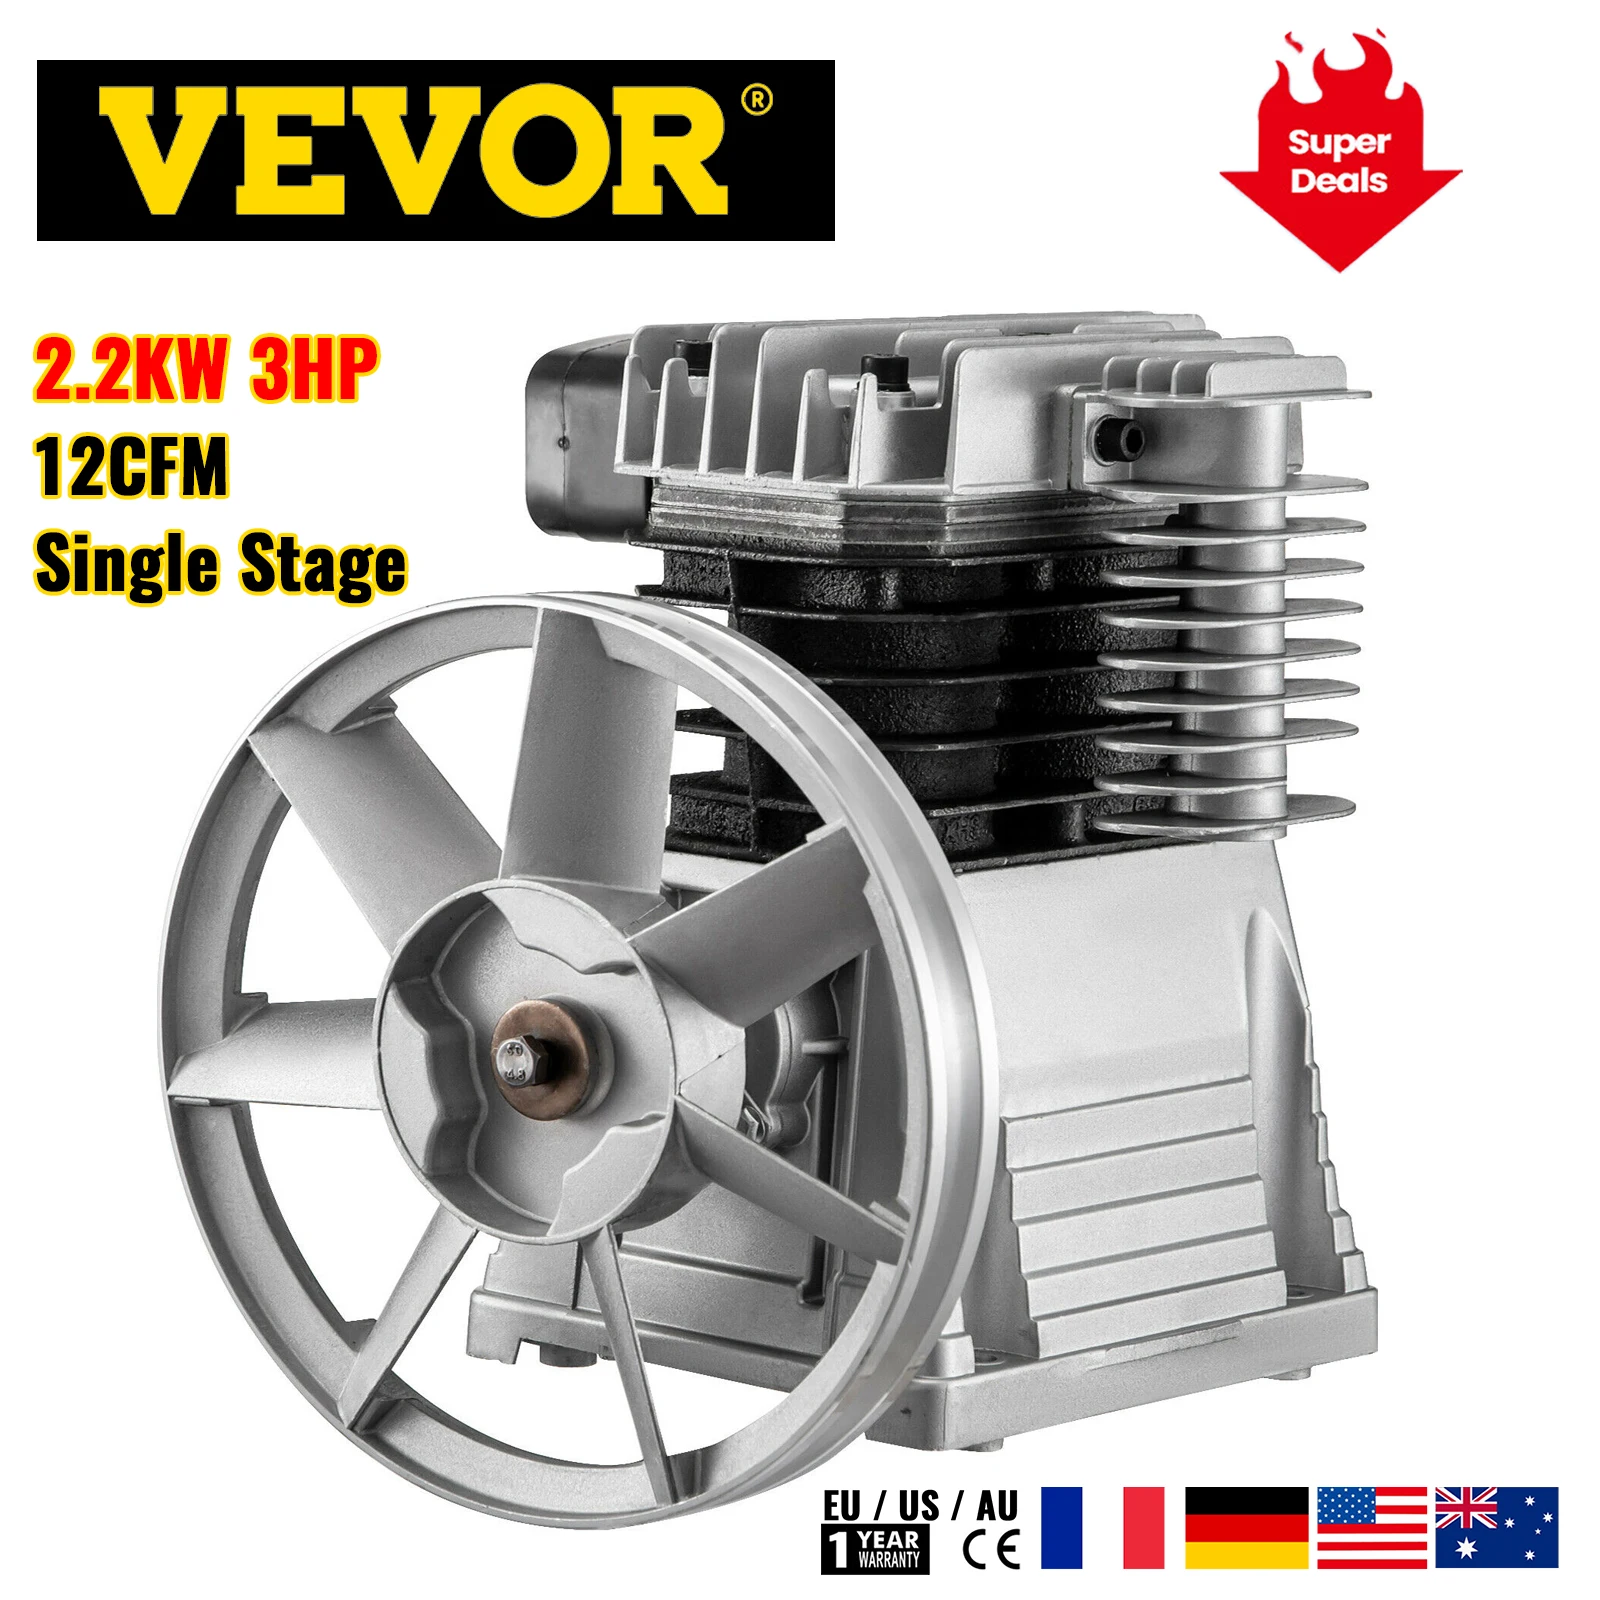 

VEVOR 2.2KW Air Compressor Heads 12CFM Twin Cylinder 3 HP Single Stage 1300RPM Piston Pump Suitable for Farm Industry Machinery